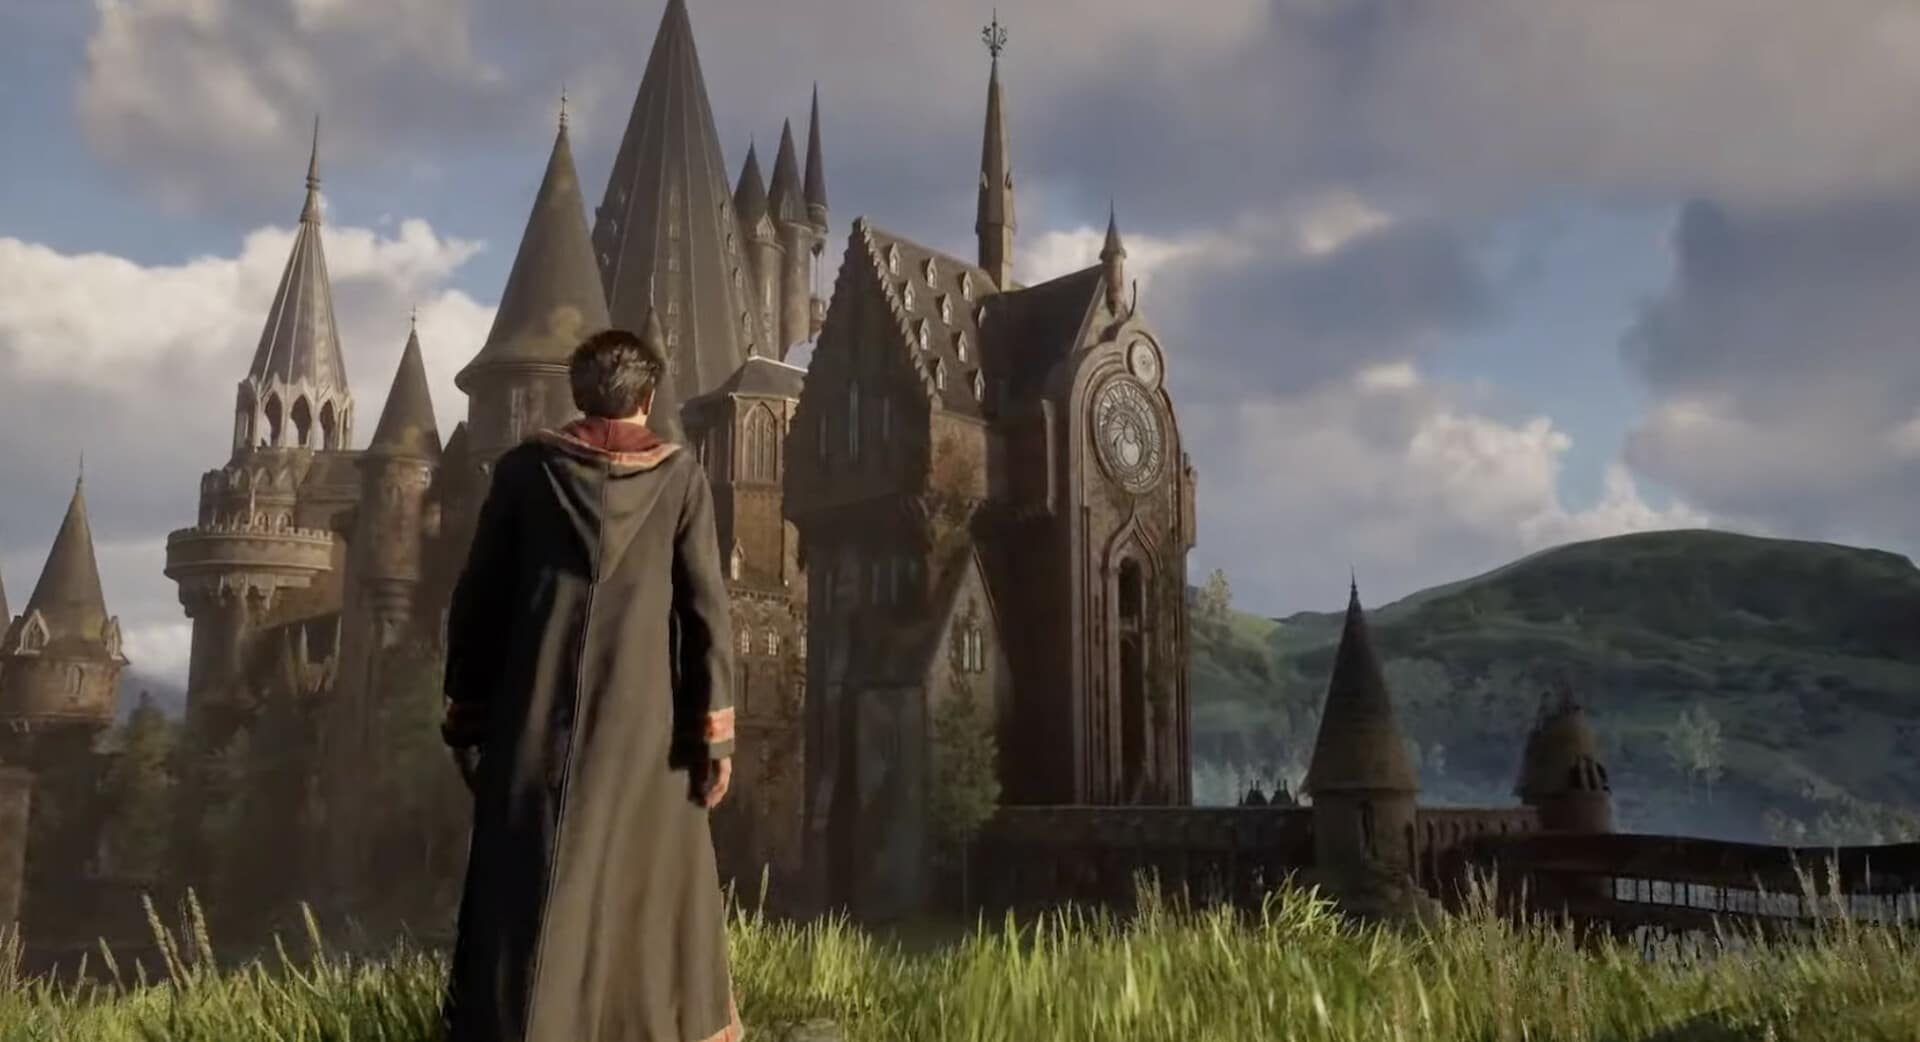 Hogwarts Legacy Release Date: Gameplay, Trailer, and Story